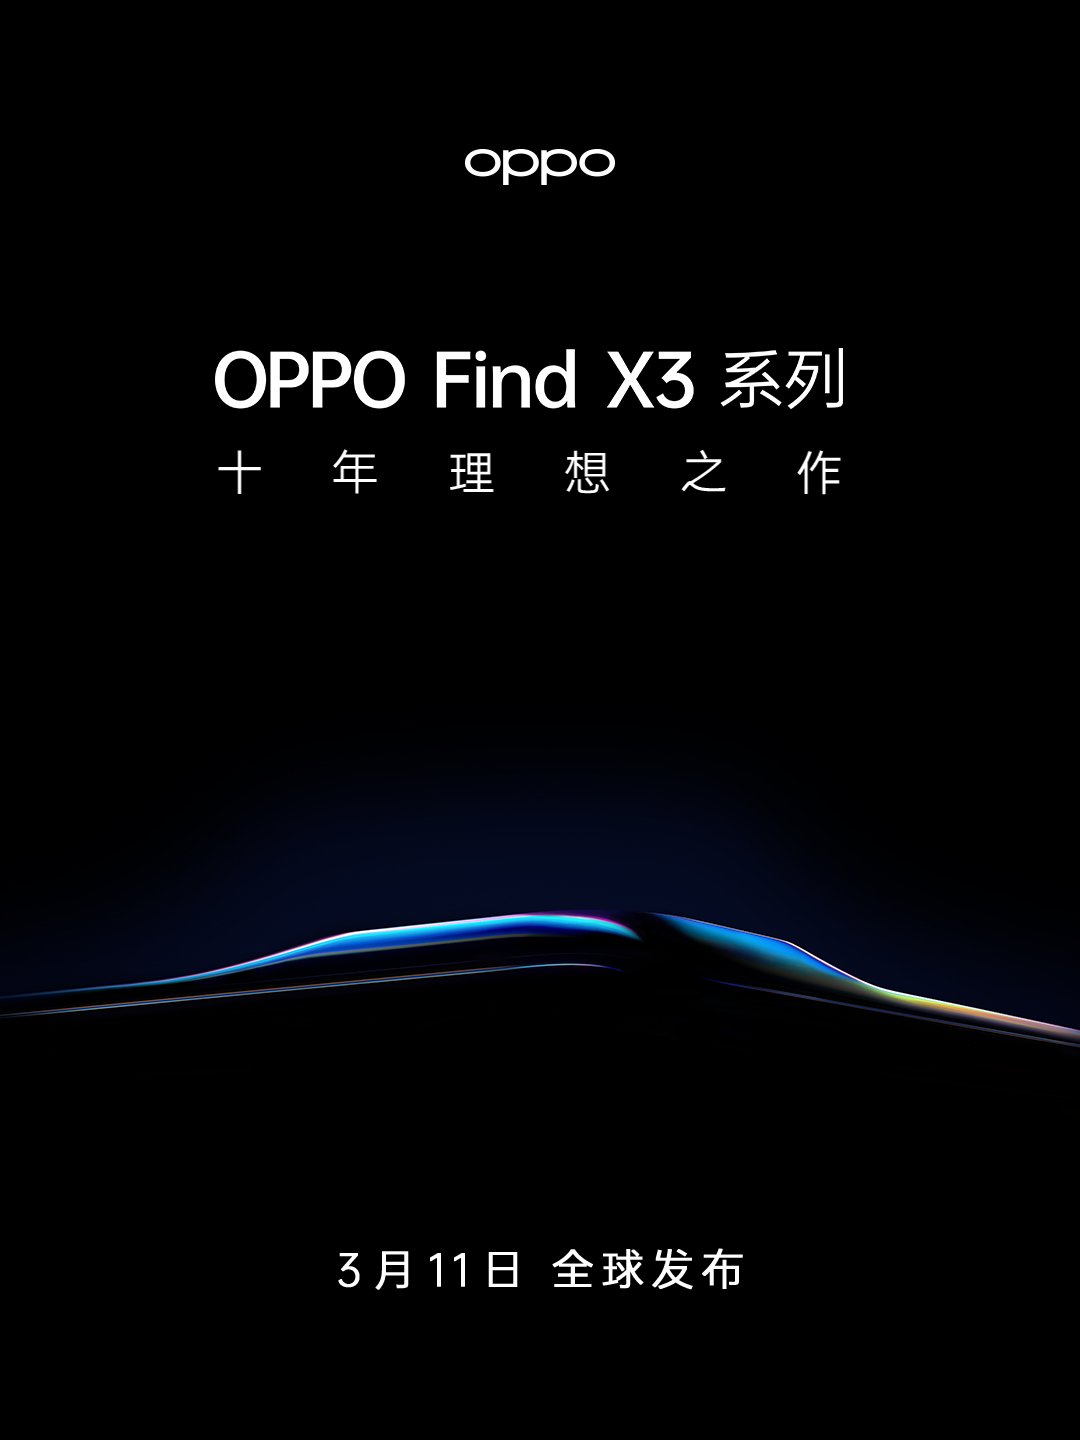 OPPO Find X3 launch date